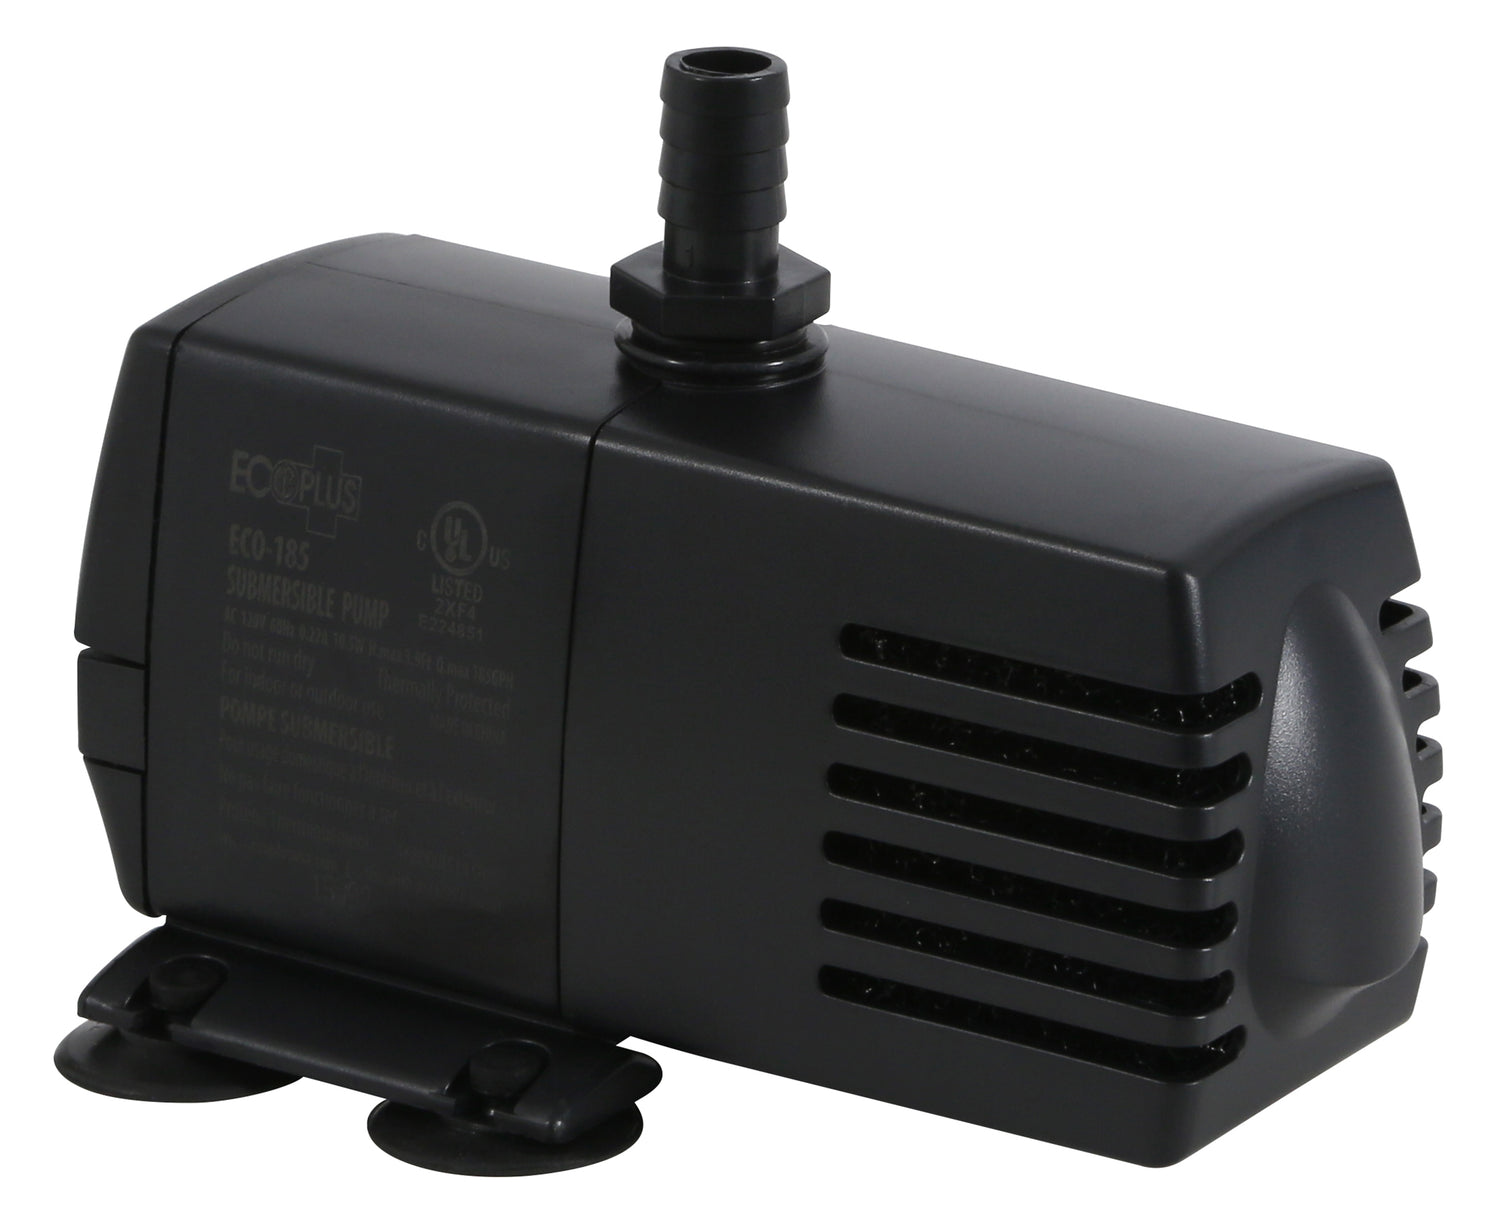 EcoPlus Fixed Flow Submersible or Inline Pumps (H)